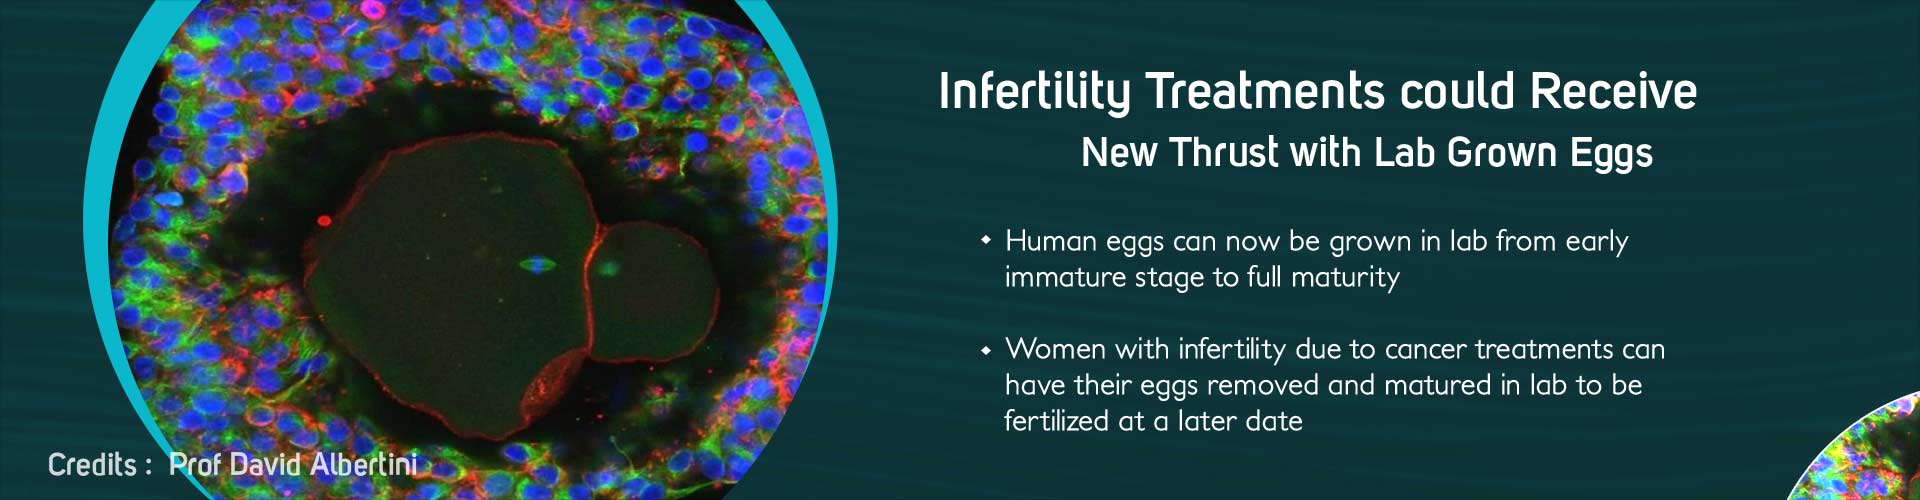 infertility treatments could receive new thrust with lab grown eggs
- human eggs can now be grown in lab from early immature stage to full maturity
- women with infertility due to cancer treatments can have their eggs removed and matured in lab to be fertilized at a later date